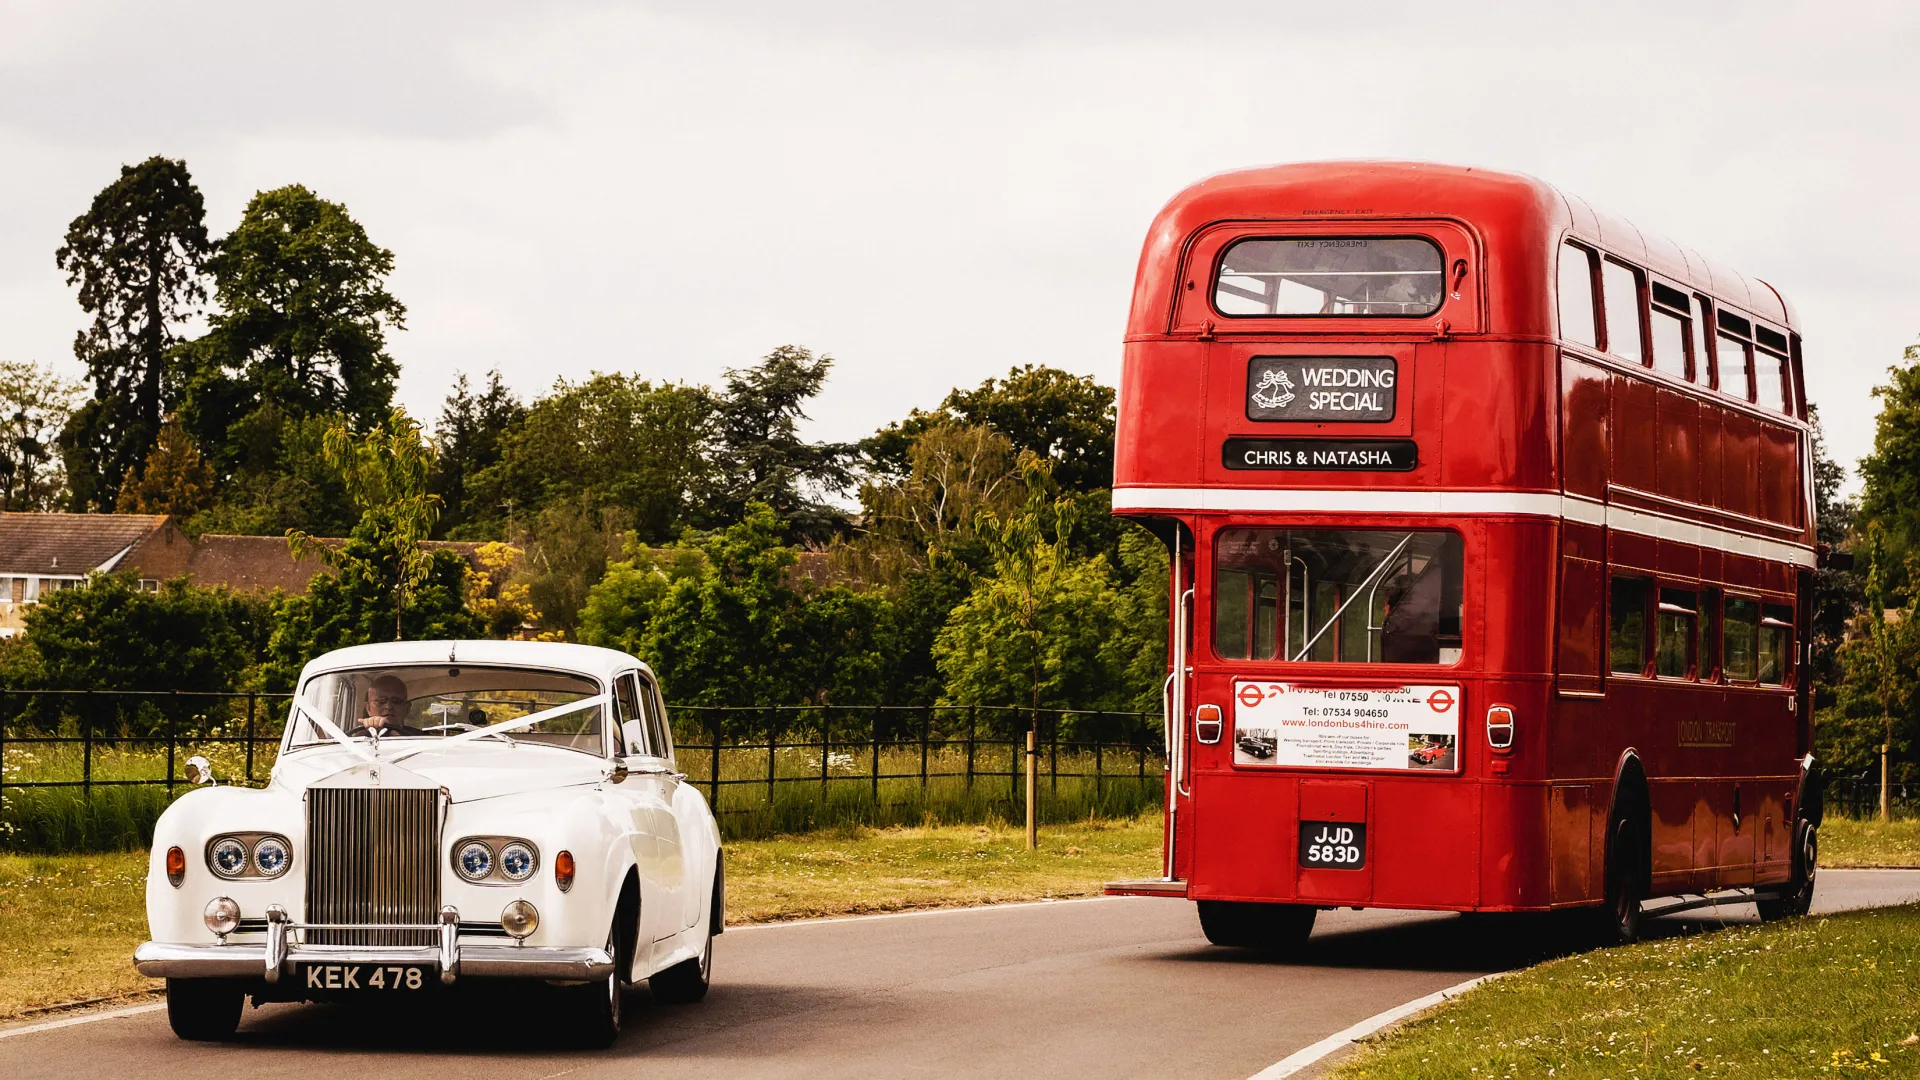 White Classic Rolls-Royce Silver Cloud decorated with wedding ribbons entering a wedding venue while a Double Decker Red Routemaster is leaving